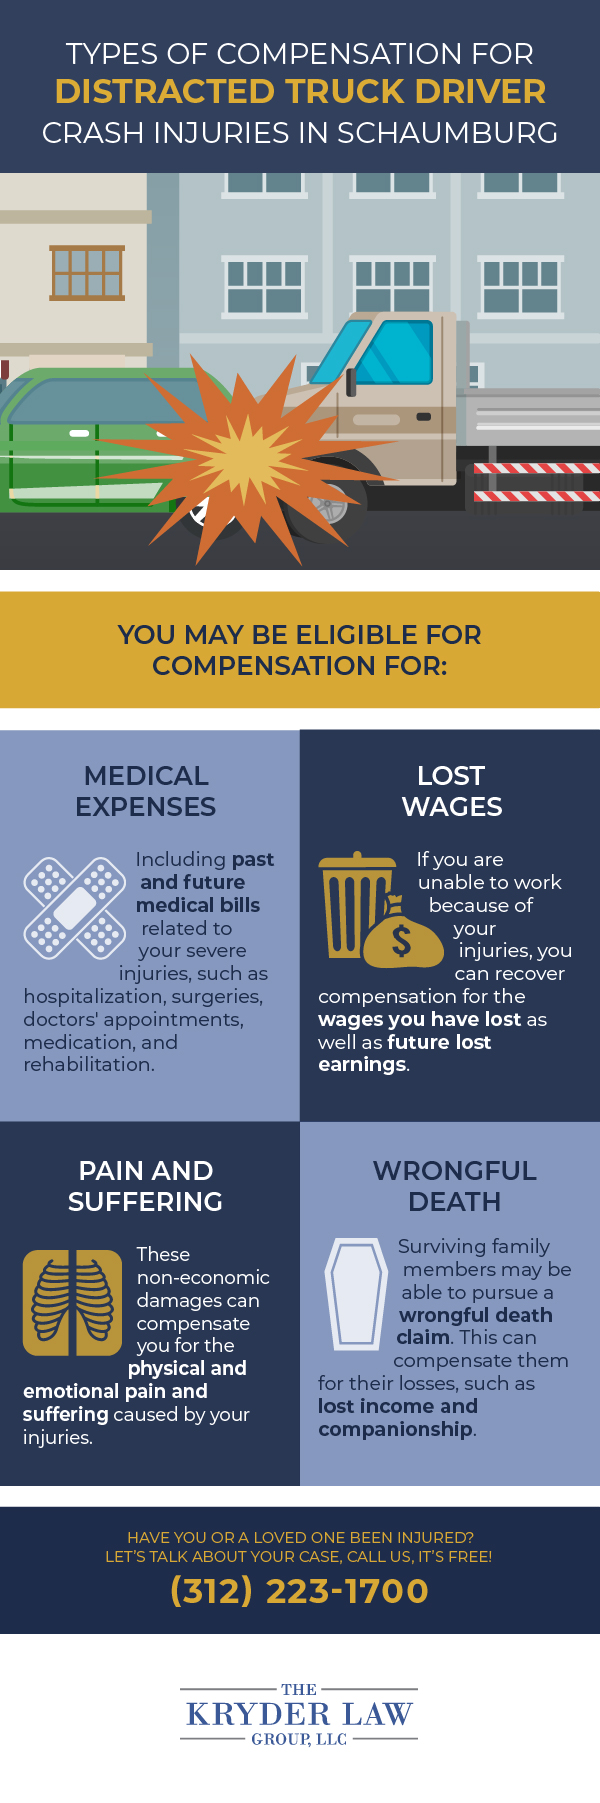 Types of Compensation for Distracted Truck Driver Crash Injuries in Schaumburg Infographic